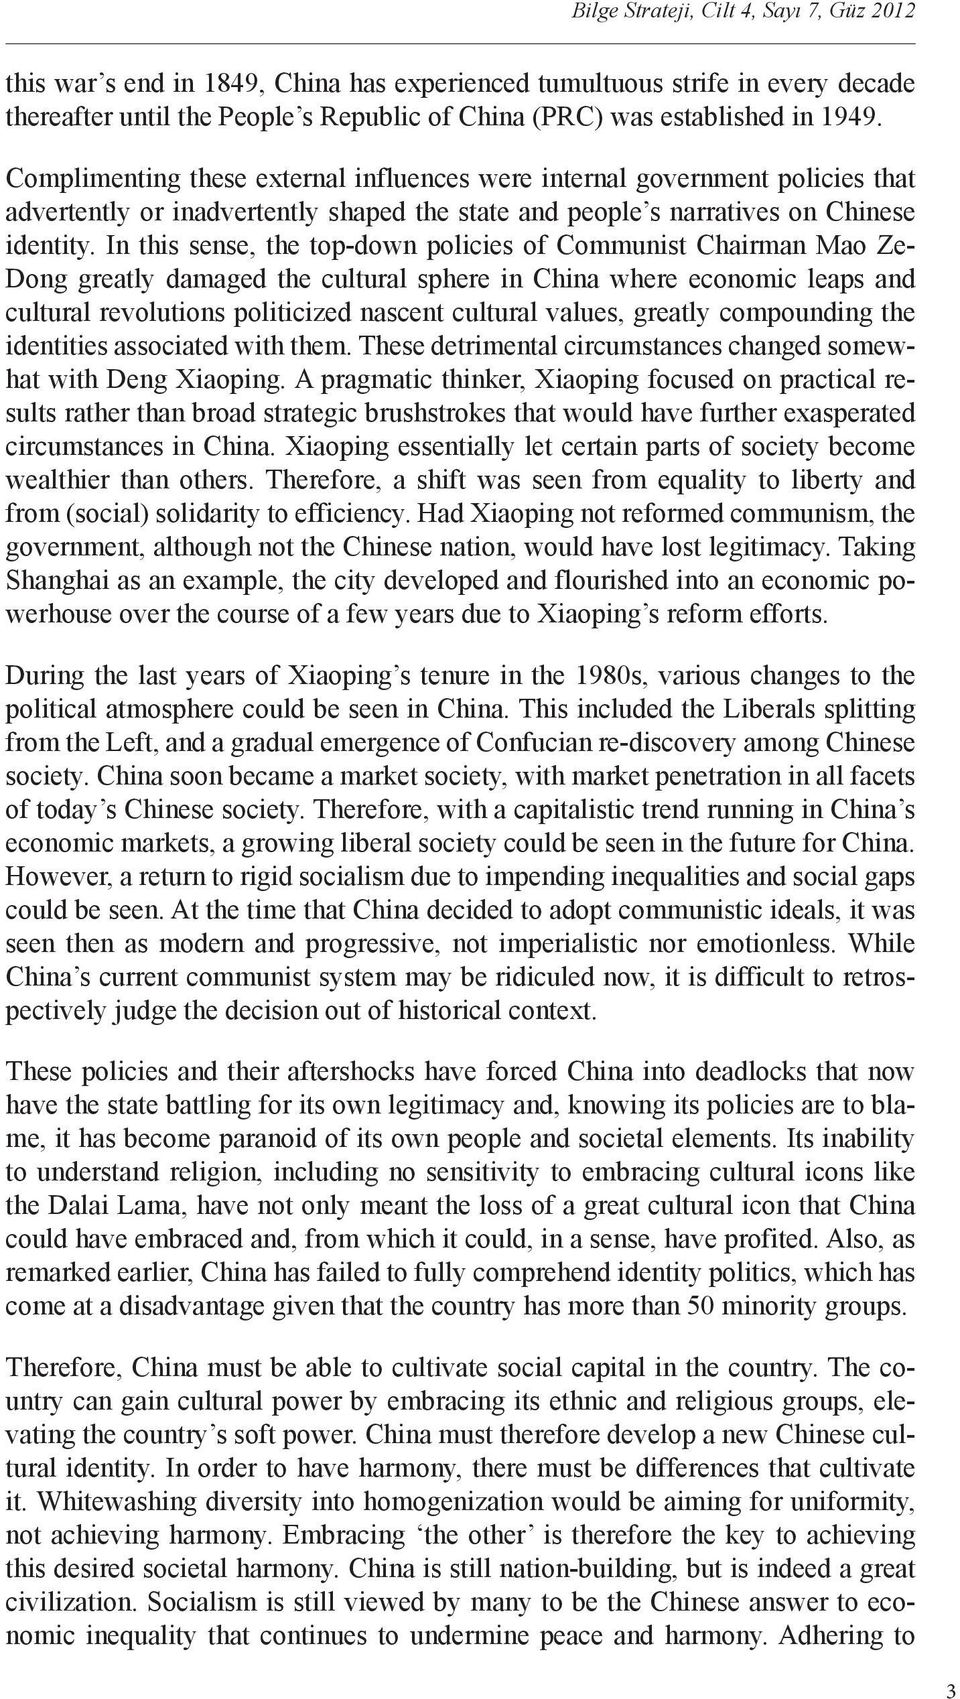 In this sense, the top-down policies of Communist Chairman Mao Ze- Dong greatly damaged the cultural sphere in China where economic leaps and cultural revolutions politicized nascent cultural values,